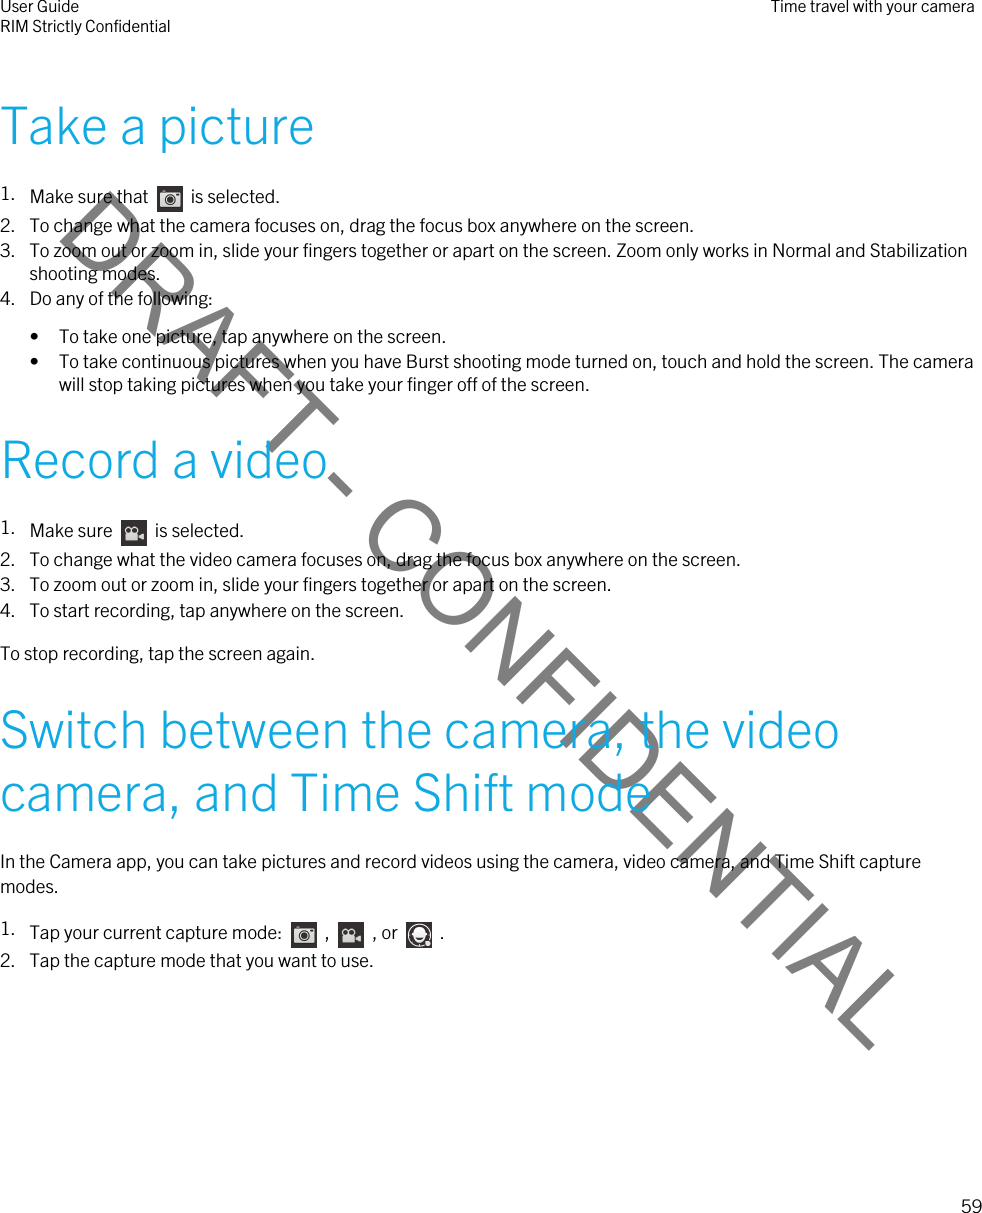 DRAFT - CONFIDENTIALTake a picture1. Make sure that    is selected. 2. To change what the camera focuses on, drag the focus box anywhere on the screen.3. To zoom out or zoom in, slide your fingers together or apart on the screen. Zoom only works in Normal and Stabilization shooting modes.4. Do any of the following:• To take one picture, tap anywhere on the screen.• To take continuous pictures when you have Burst shooting mode turned on, touch and hold the screen. The camera will stop taking pictures when you take your finger off of the screen.Record a video1. Make sure    is selected. 2. To change what the video camera focuses on, drag the focus box anywhere on the screen.3. To zoom out or zoom in, slide your fingers together or apart on the screen.4. To start recording, tap anywhere on the screen.To stop recording, tap the screen again.Switch between the camera, the video camera, and Time Shift modeIn the Camera app, you can take pictures and record videos using the camera, video camera, and Time Shift capture modes.1. Tap your current capture mode:    ,    , or    .2. Tap the capture mode that you want to use.User GuideRIM Strictly Confidential Time travel with your camera59 